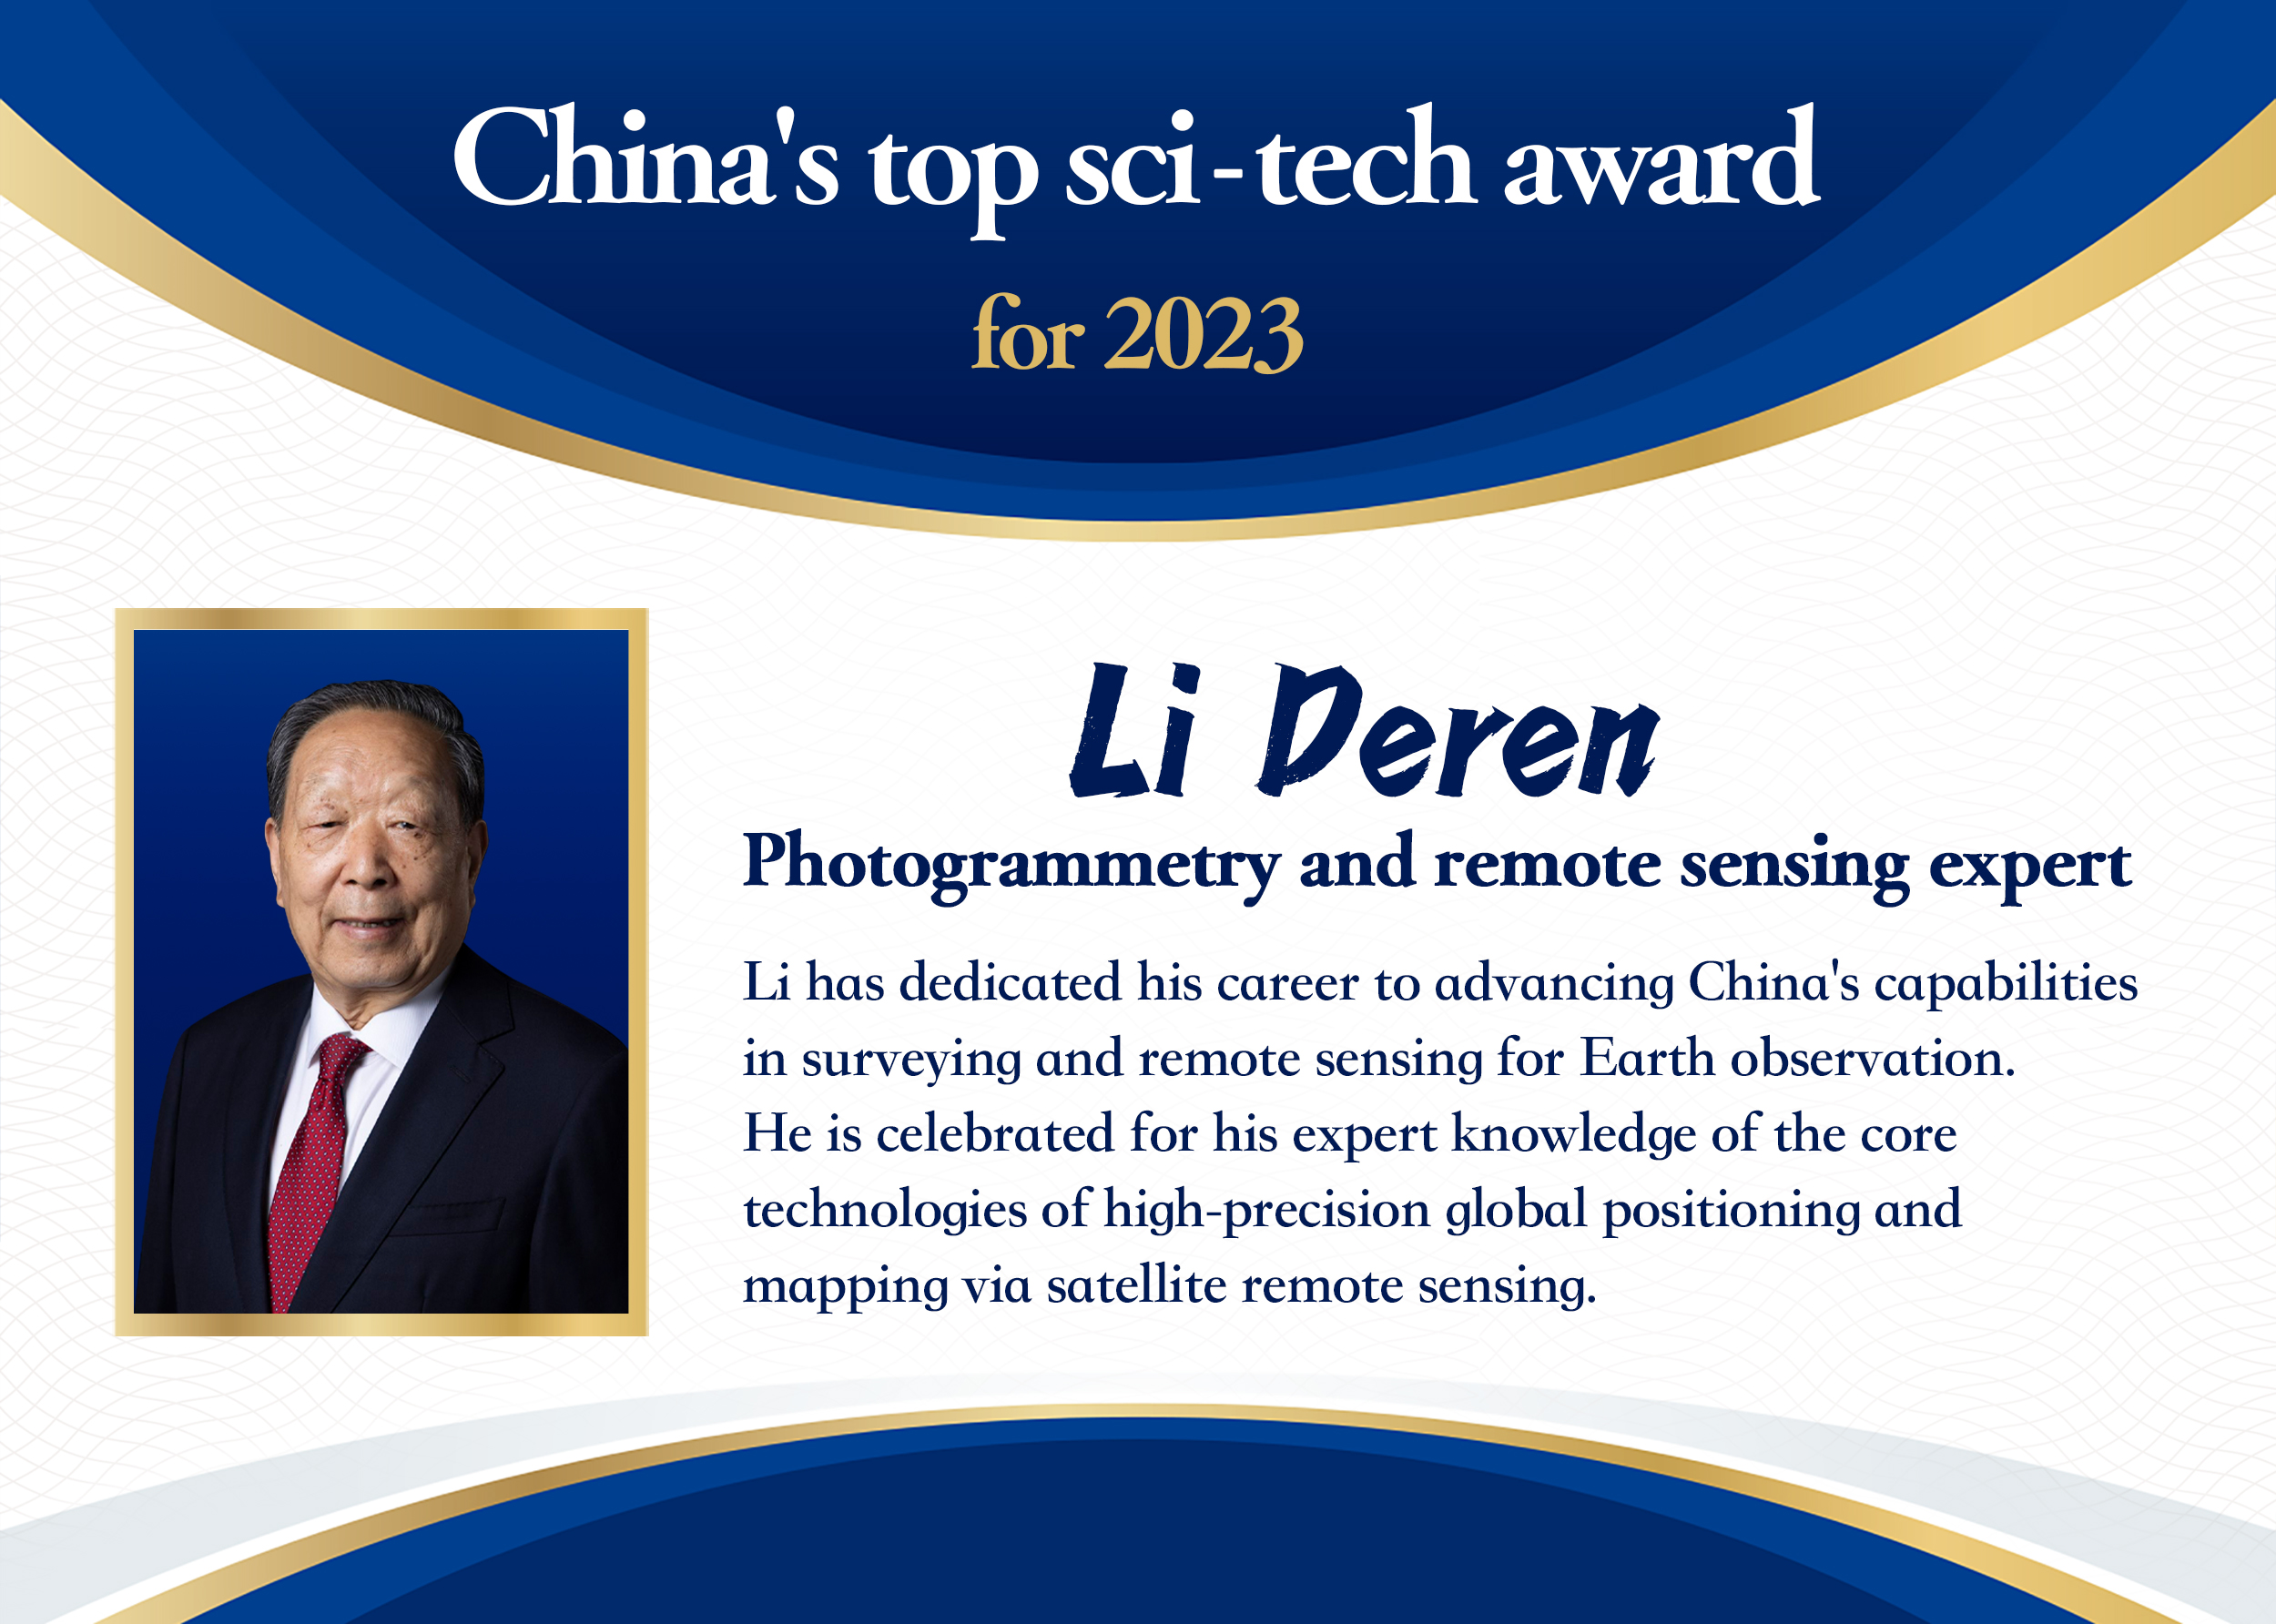 Two scientists win China's top sci-tech award for 2023